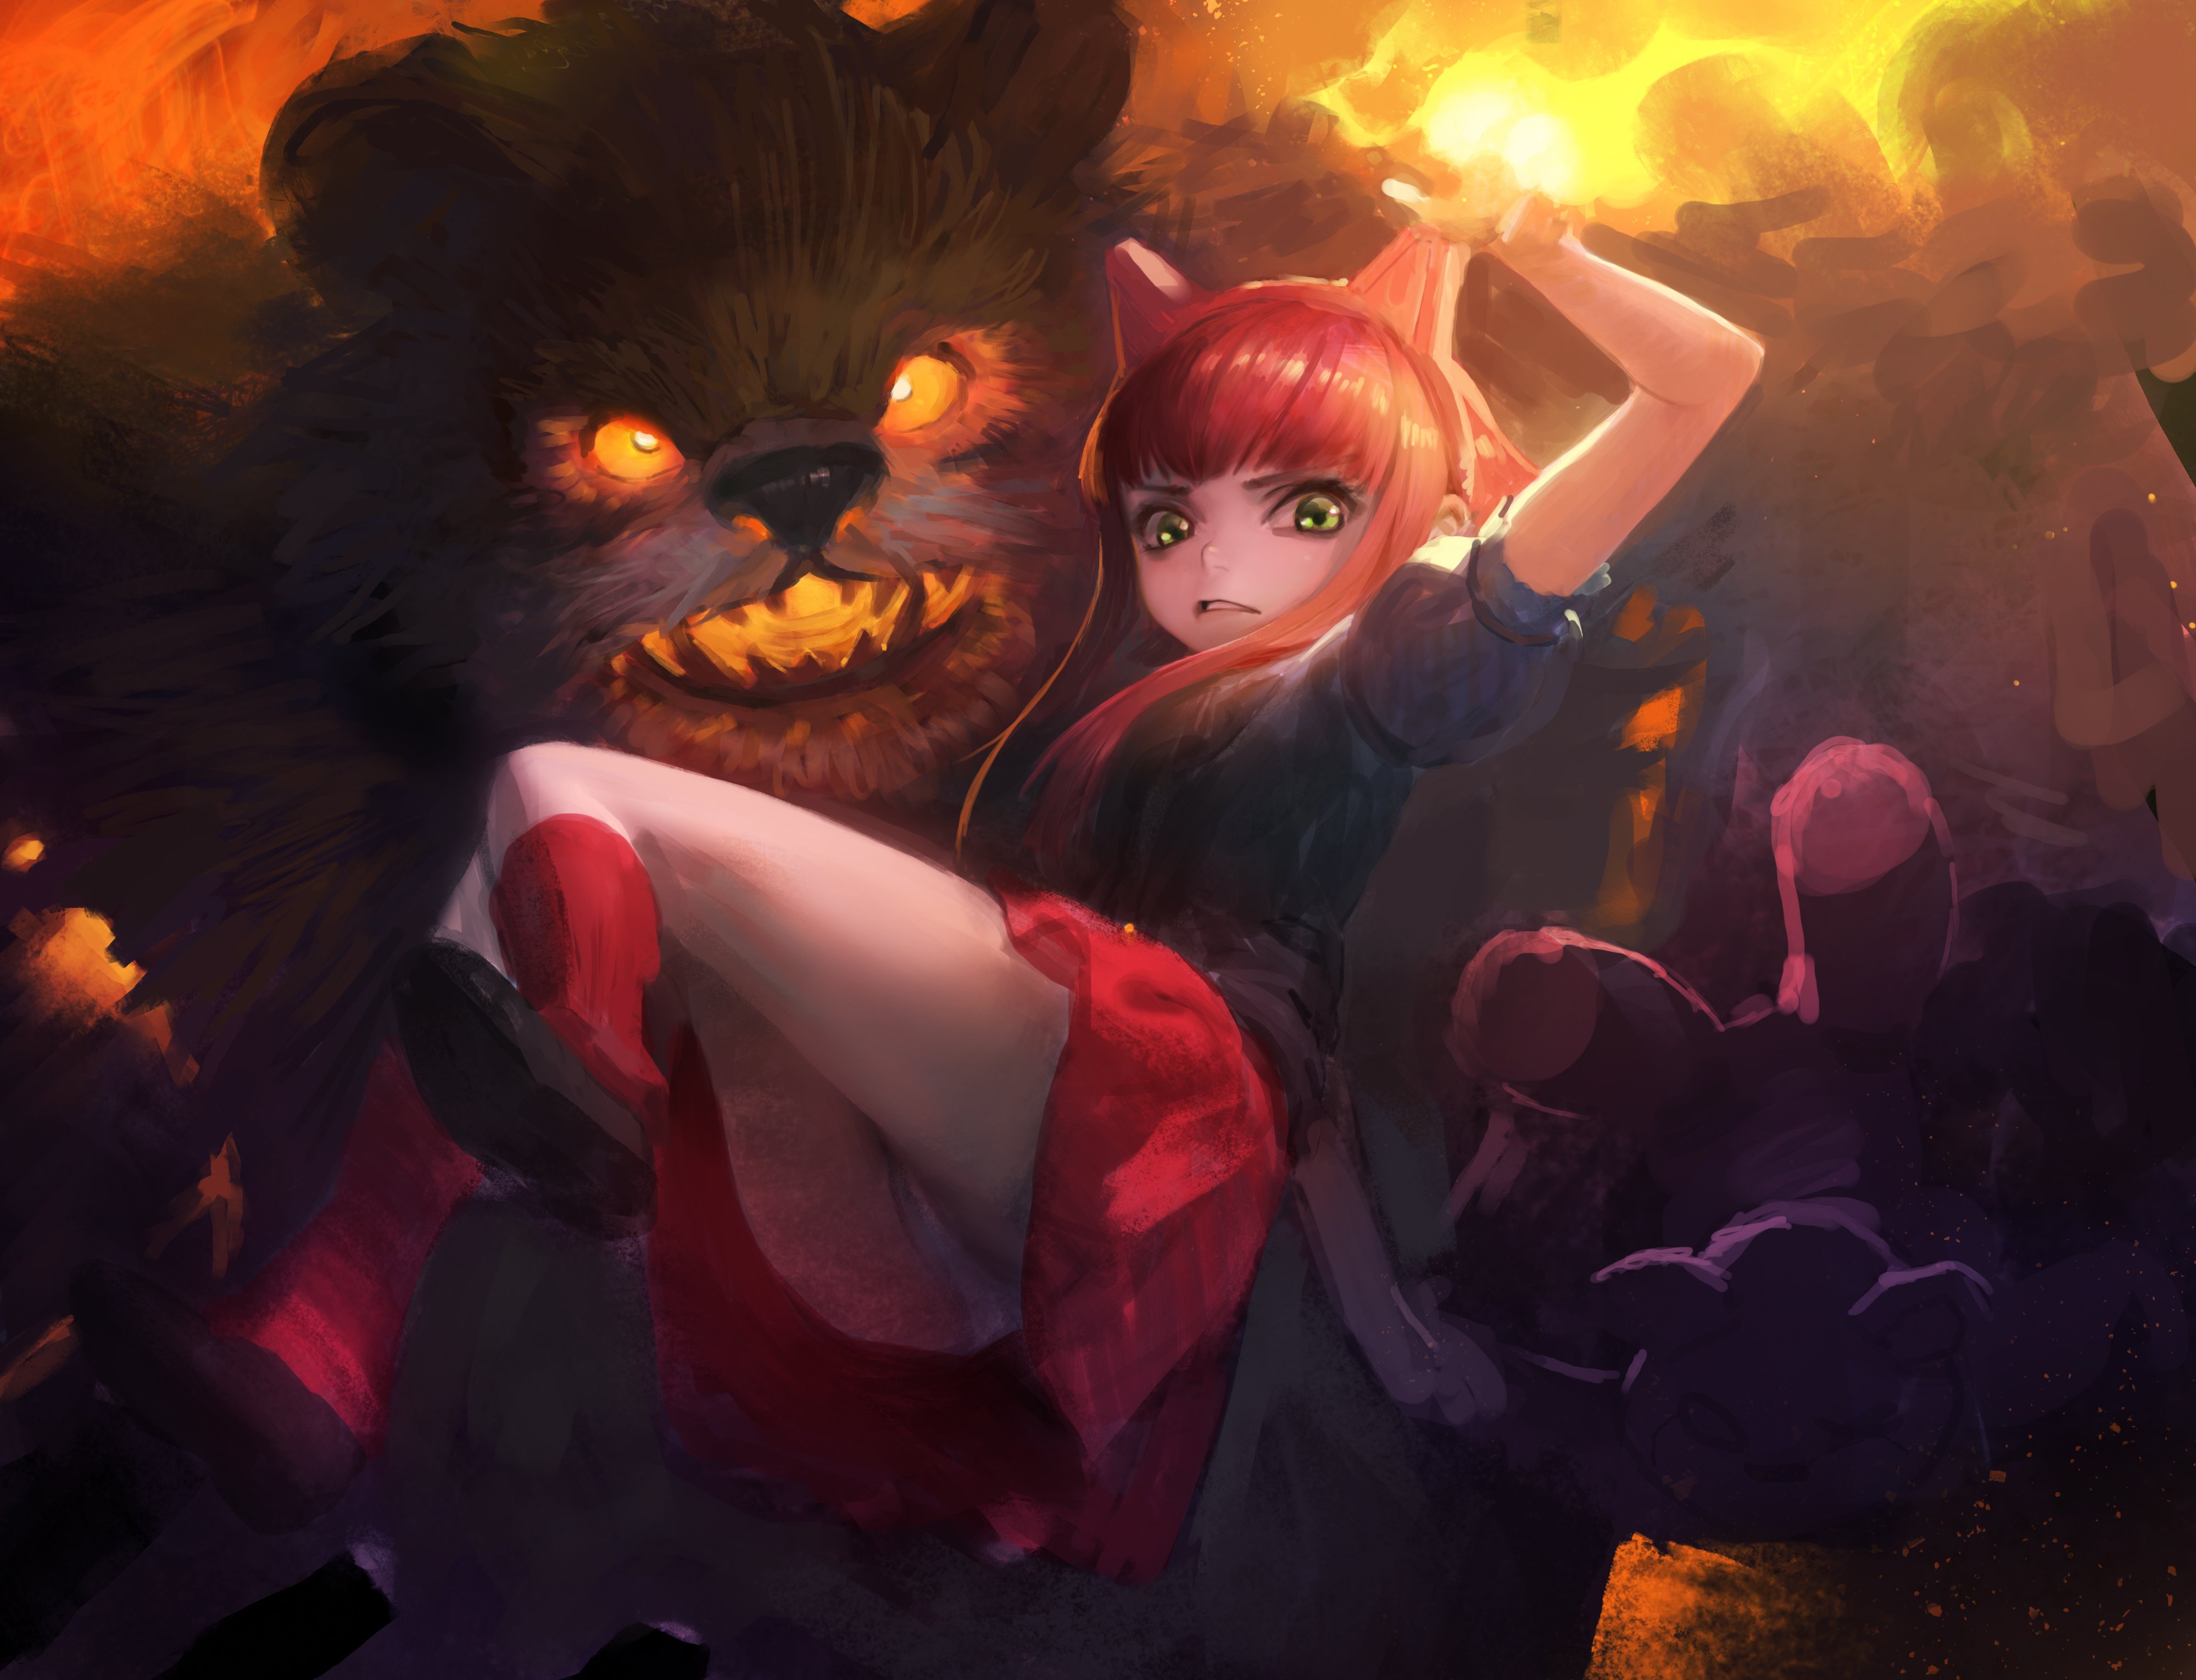 annie and tibbers (league of legends) drawn by hit kun Danbooru. 